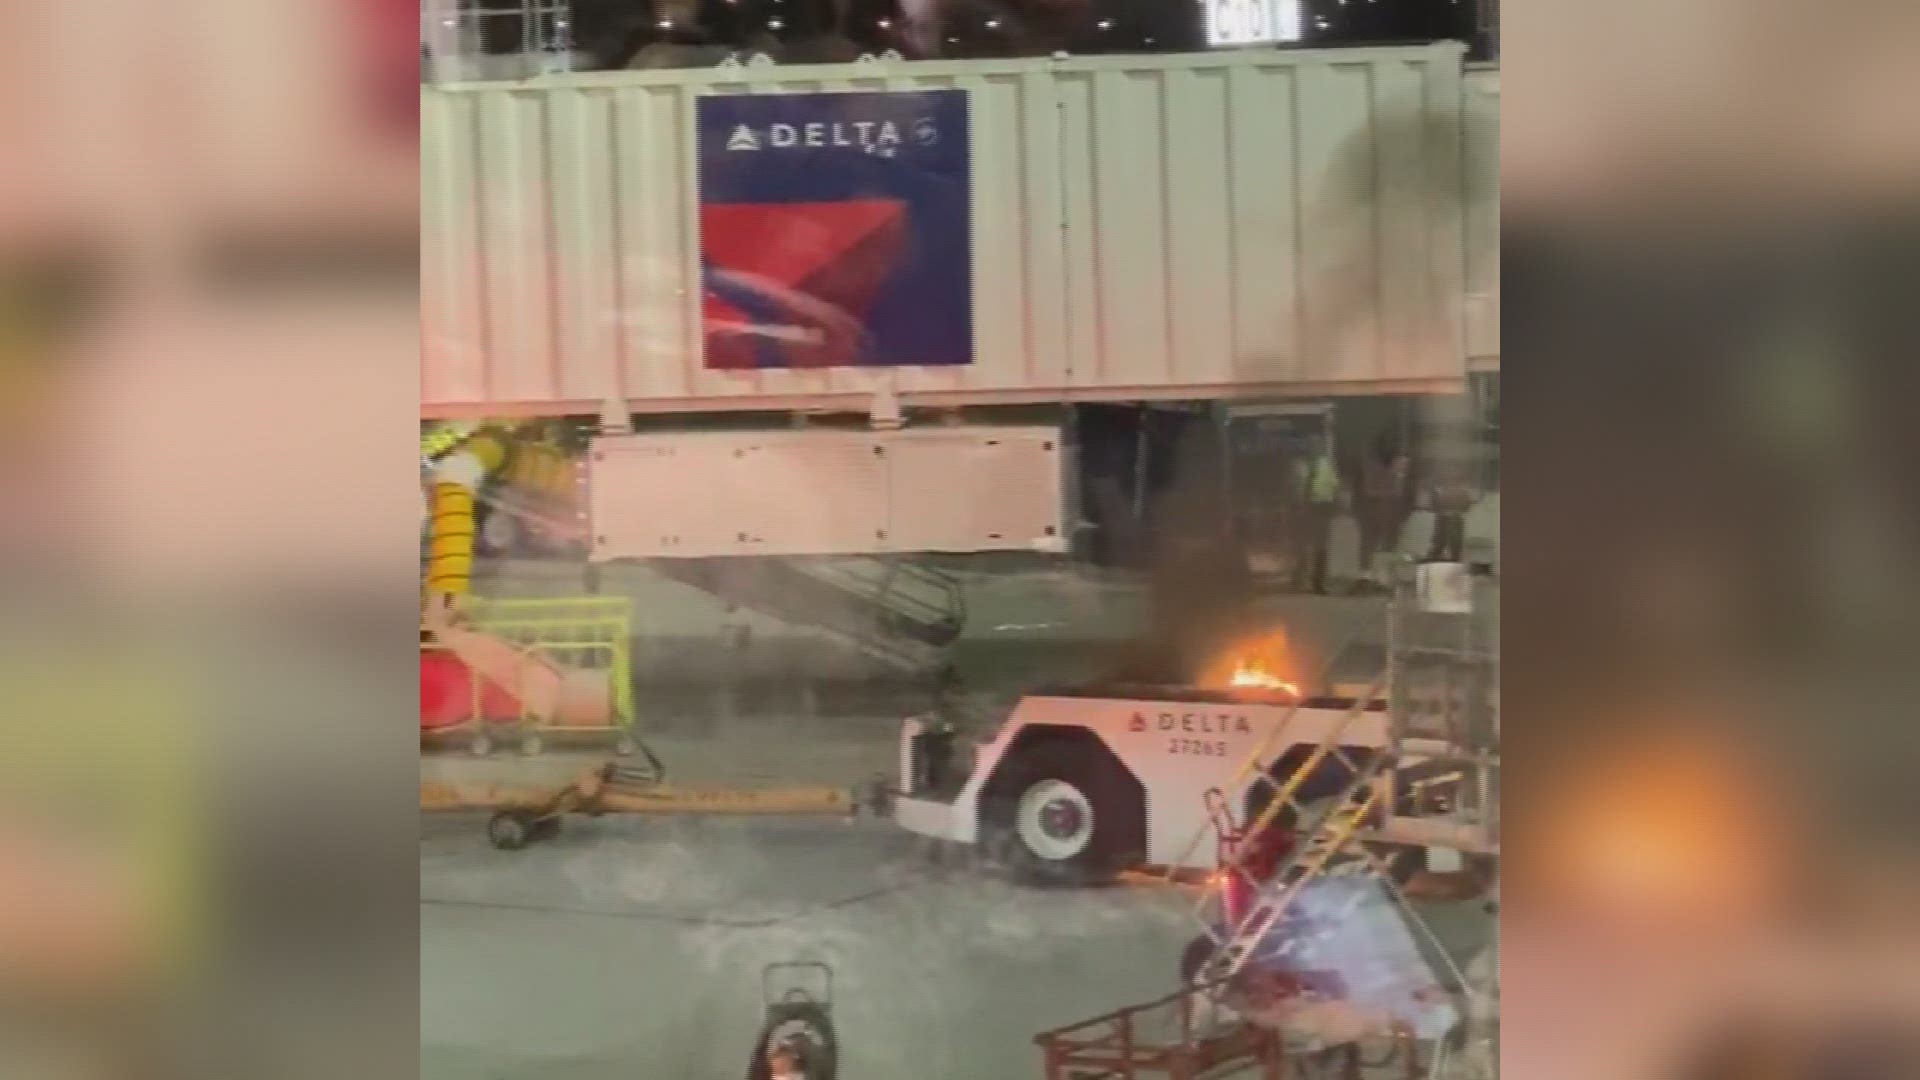 Footage shows a Delta Air Lines vehicle on fire underneath a terminal bridge.